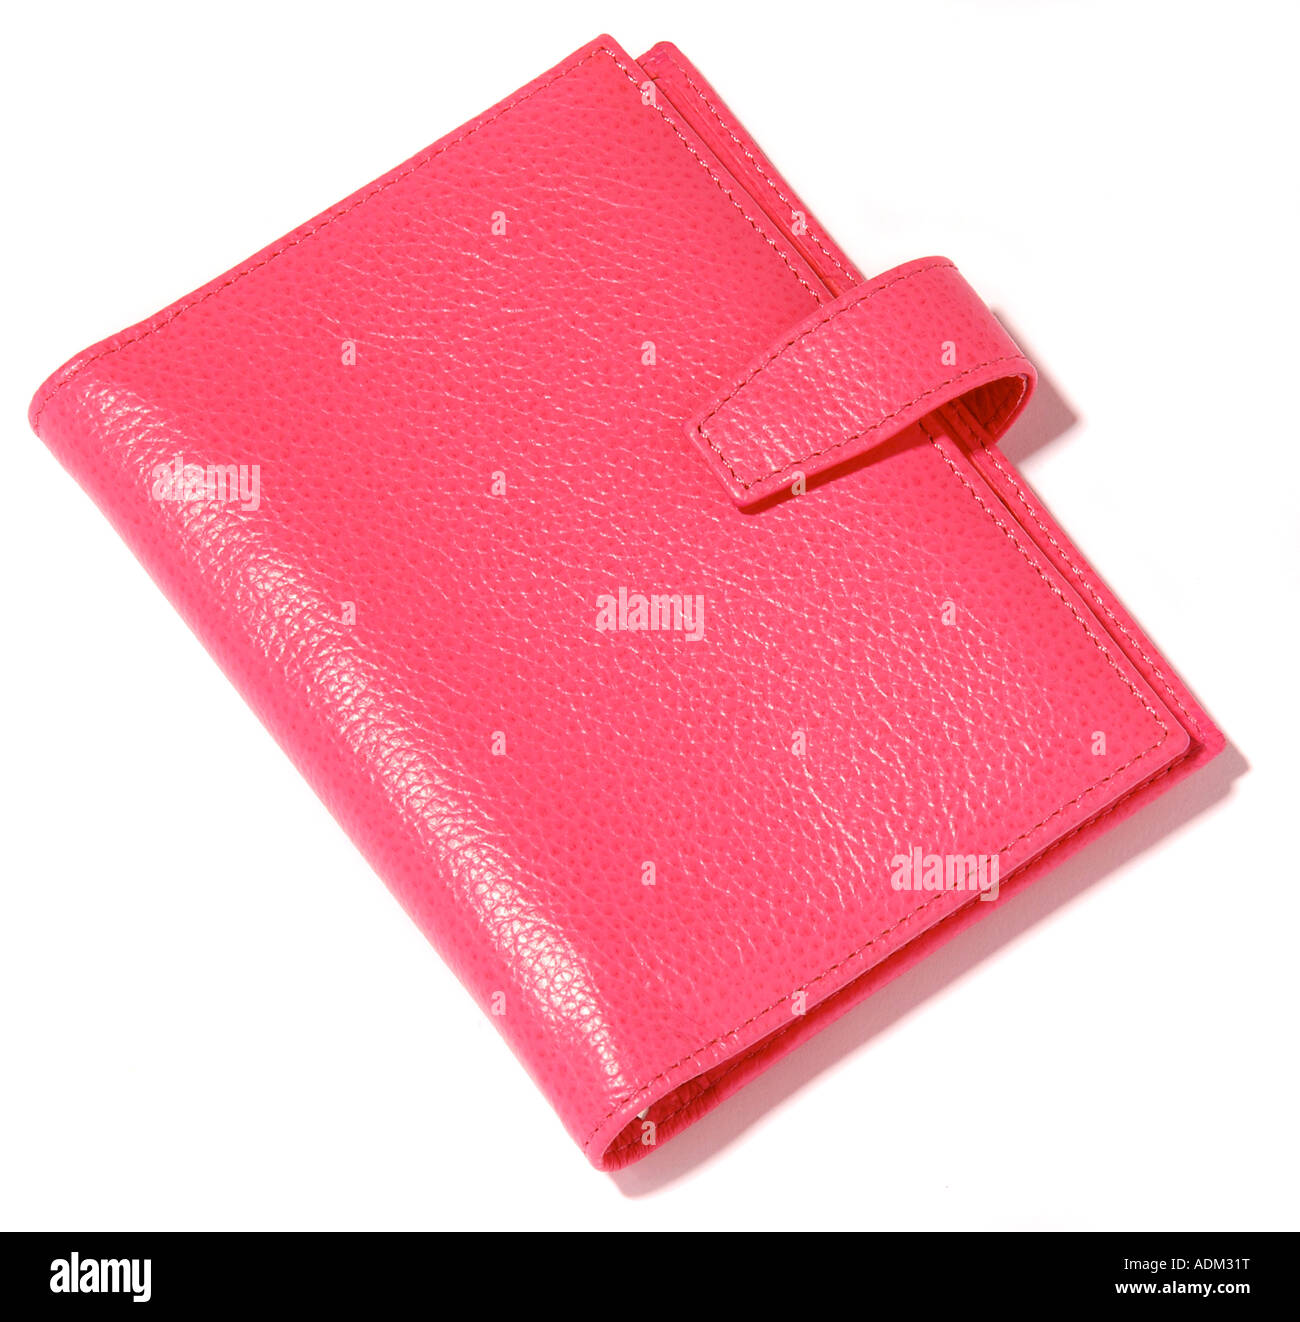 A Pink Personnel Organizer / Filofax.Picture by Paddy McGuinness paddymcguinness Stock Photo